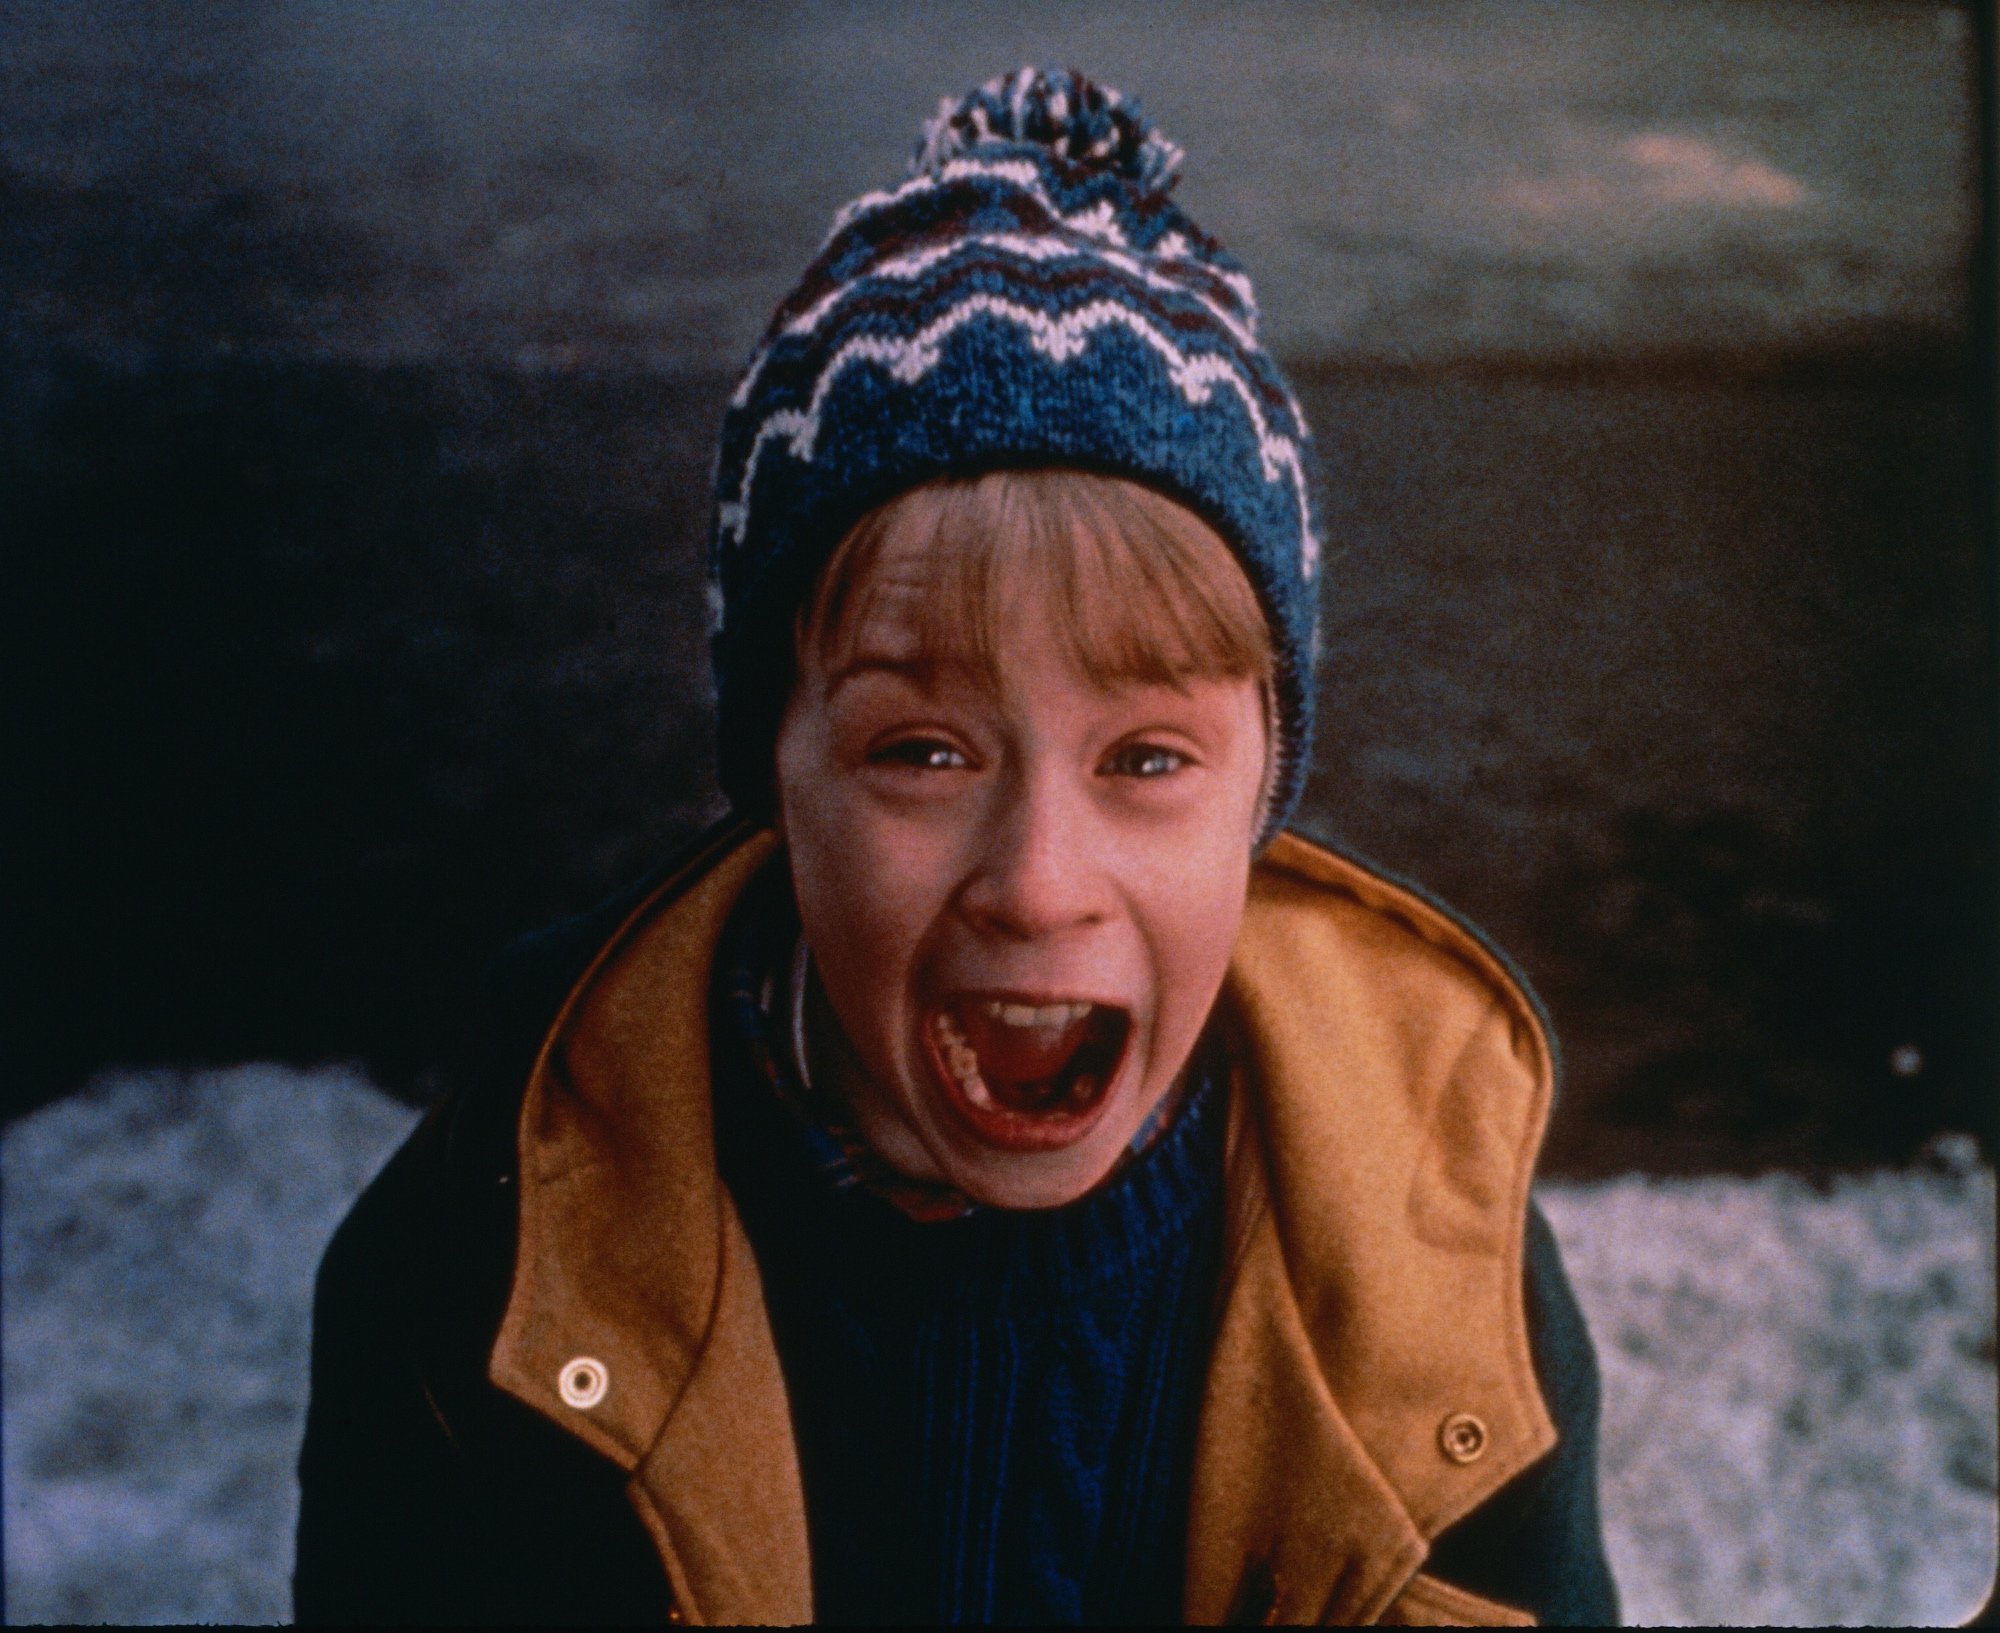 'Home Alone 2: Lost in New York' Macaulay Culkin as Kevin screaming with snow in the background